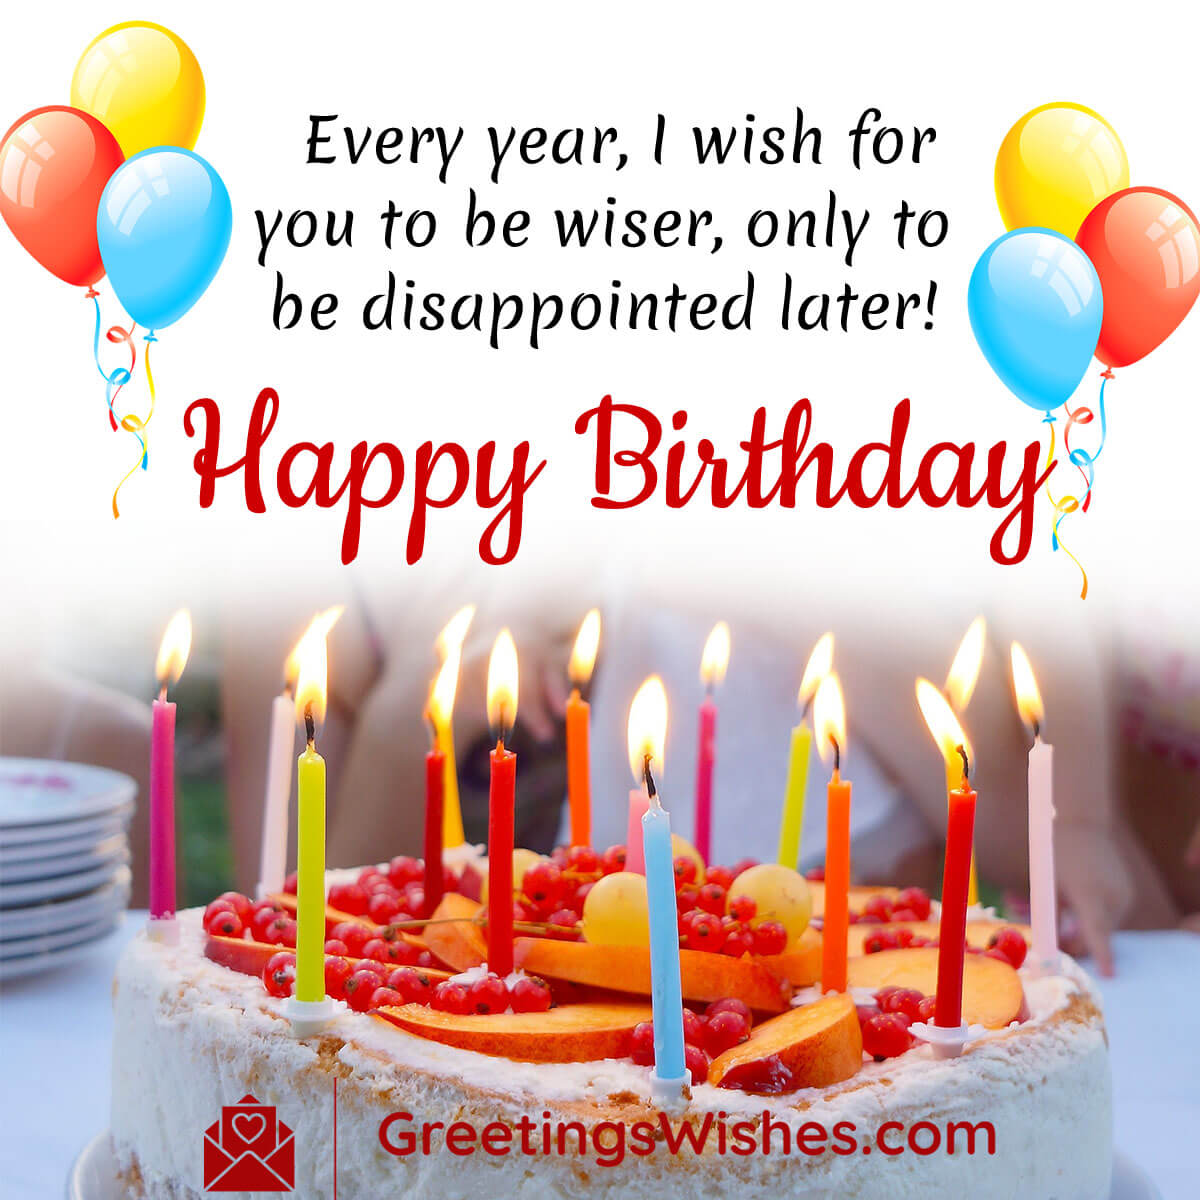 Funny Birthday Wishes - Greetings Wishes